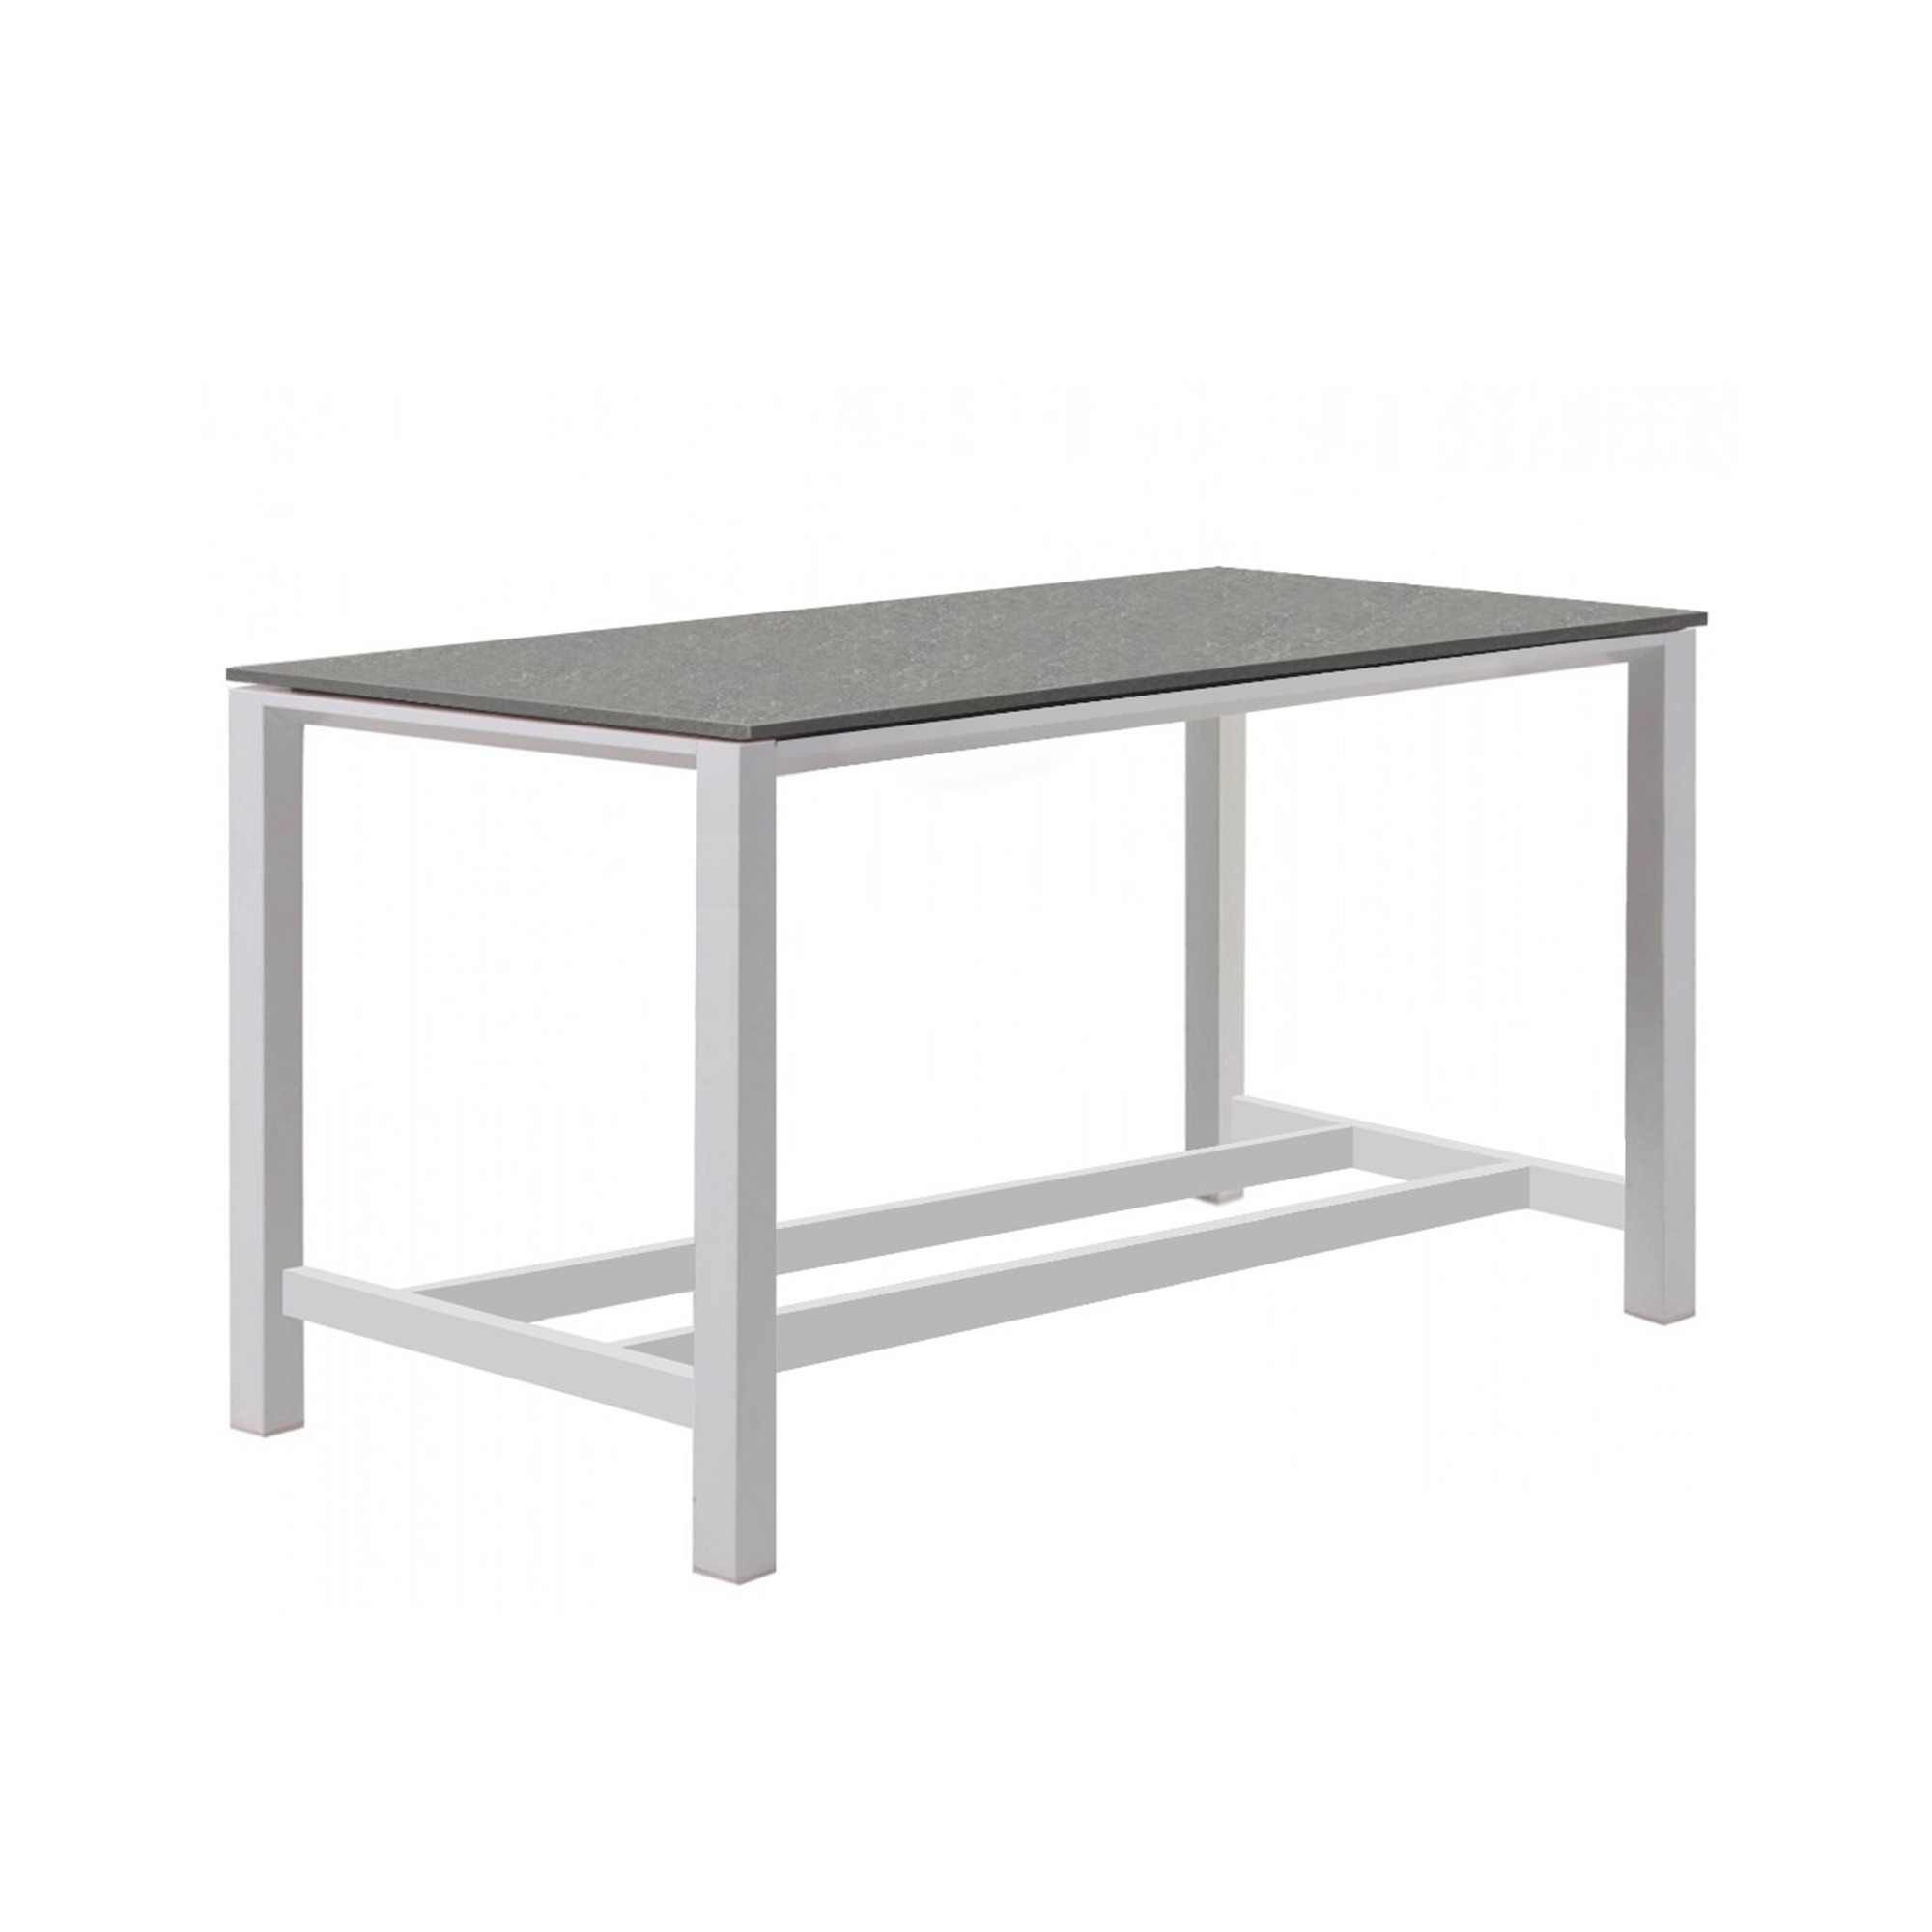 CONCEPT 55″X30″ BAR TABLE-WHITE
0040-225-241
ALSO AVAILABLE IN 83″X36″
